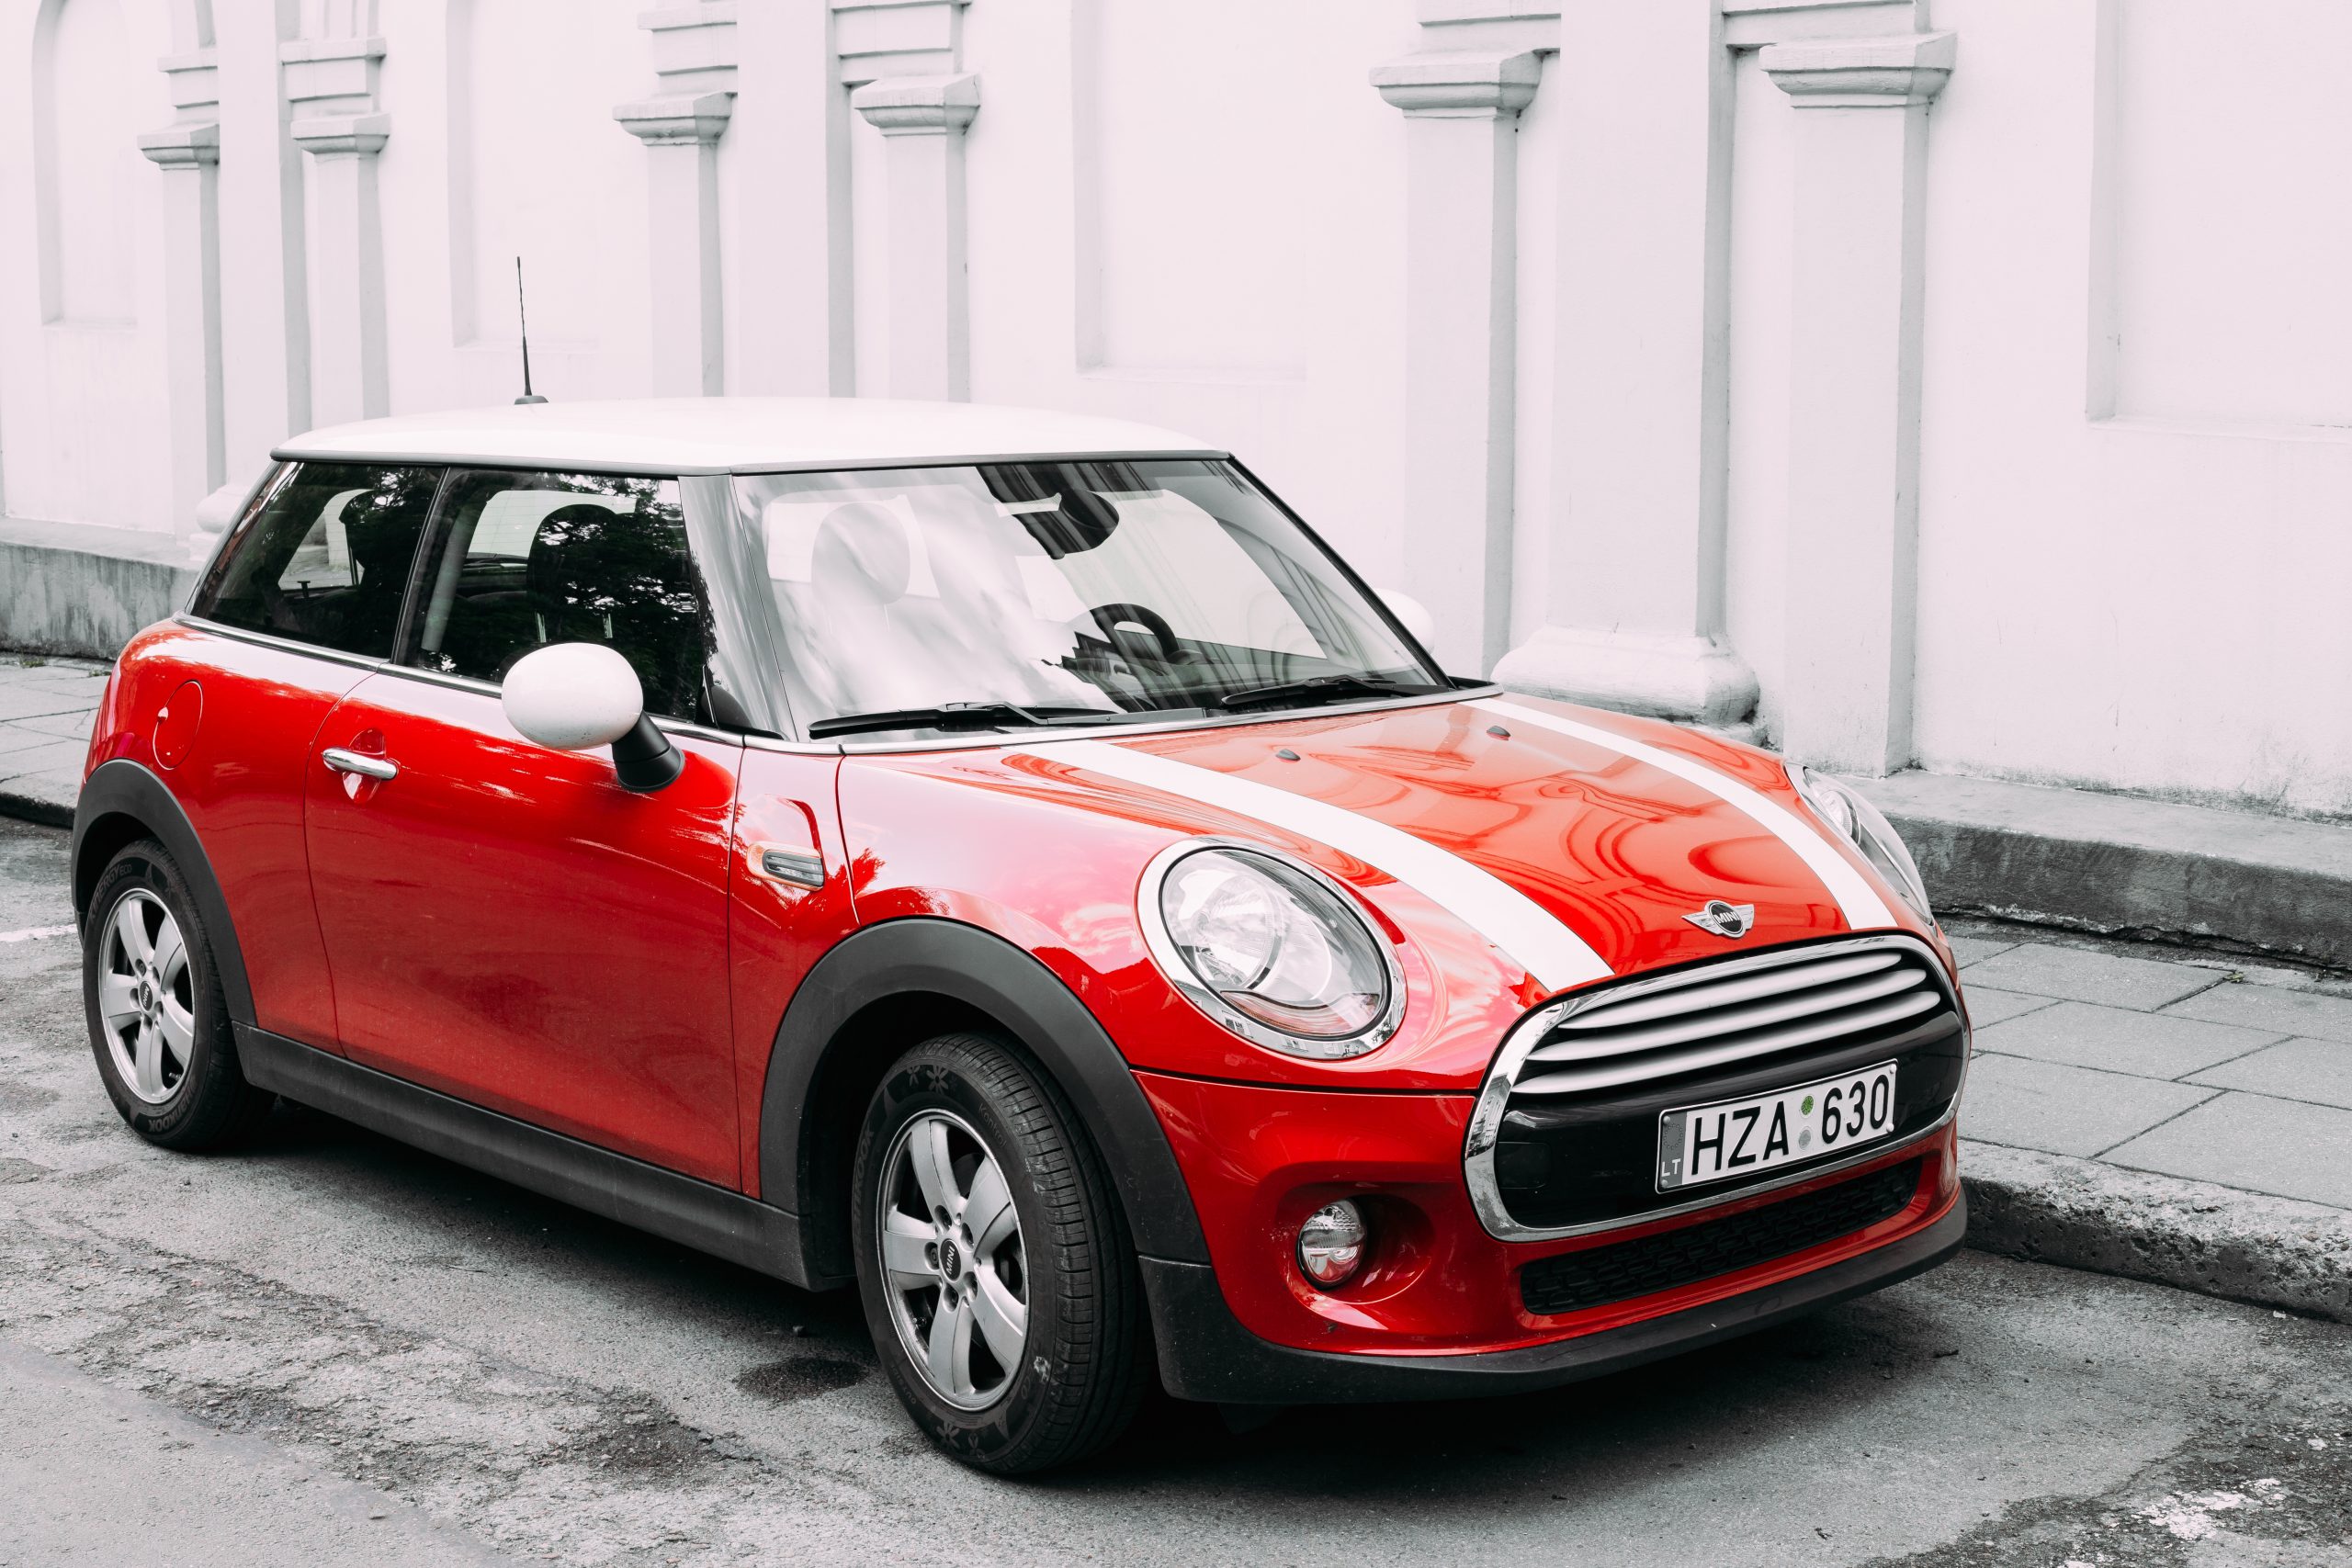 Red Color Car With White Stripes Mini Cooper Parked On Street In